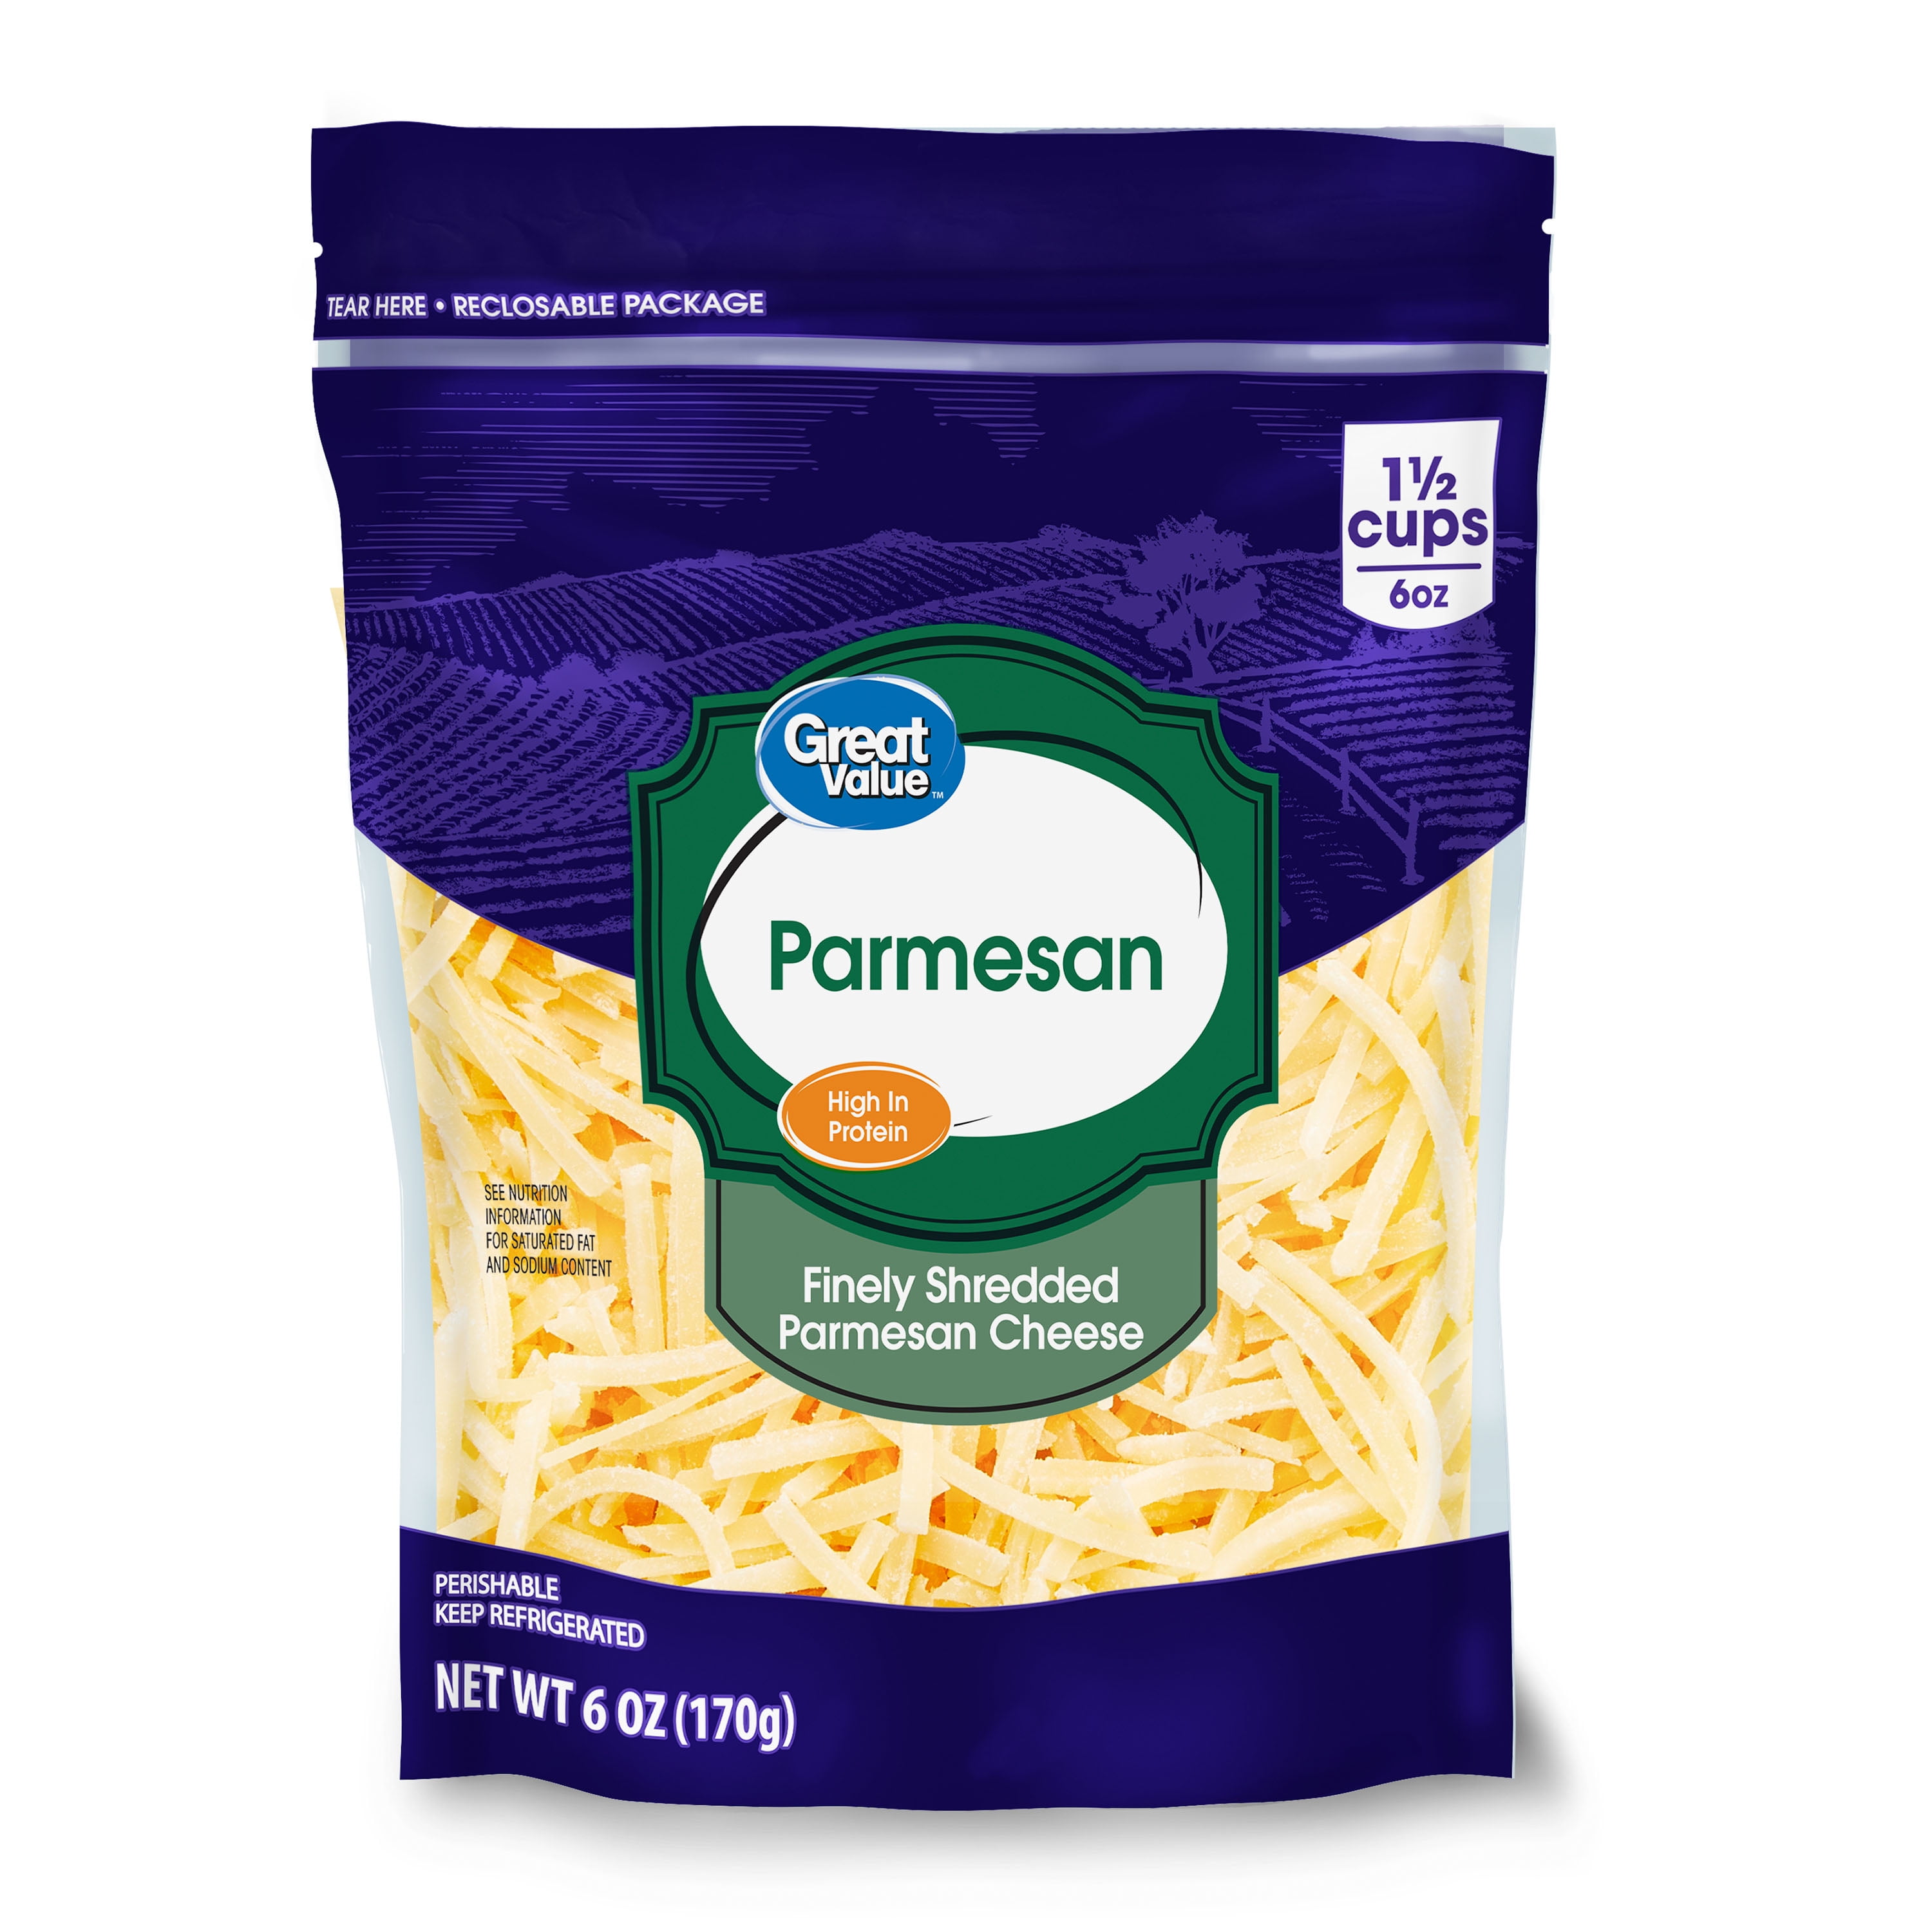 Great Value Finely Shredded Parmesan Cheese, 6 oz Walmart.com